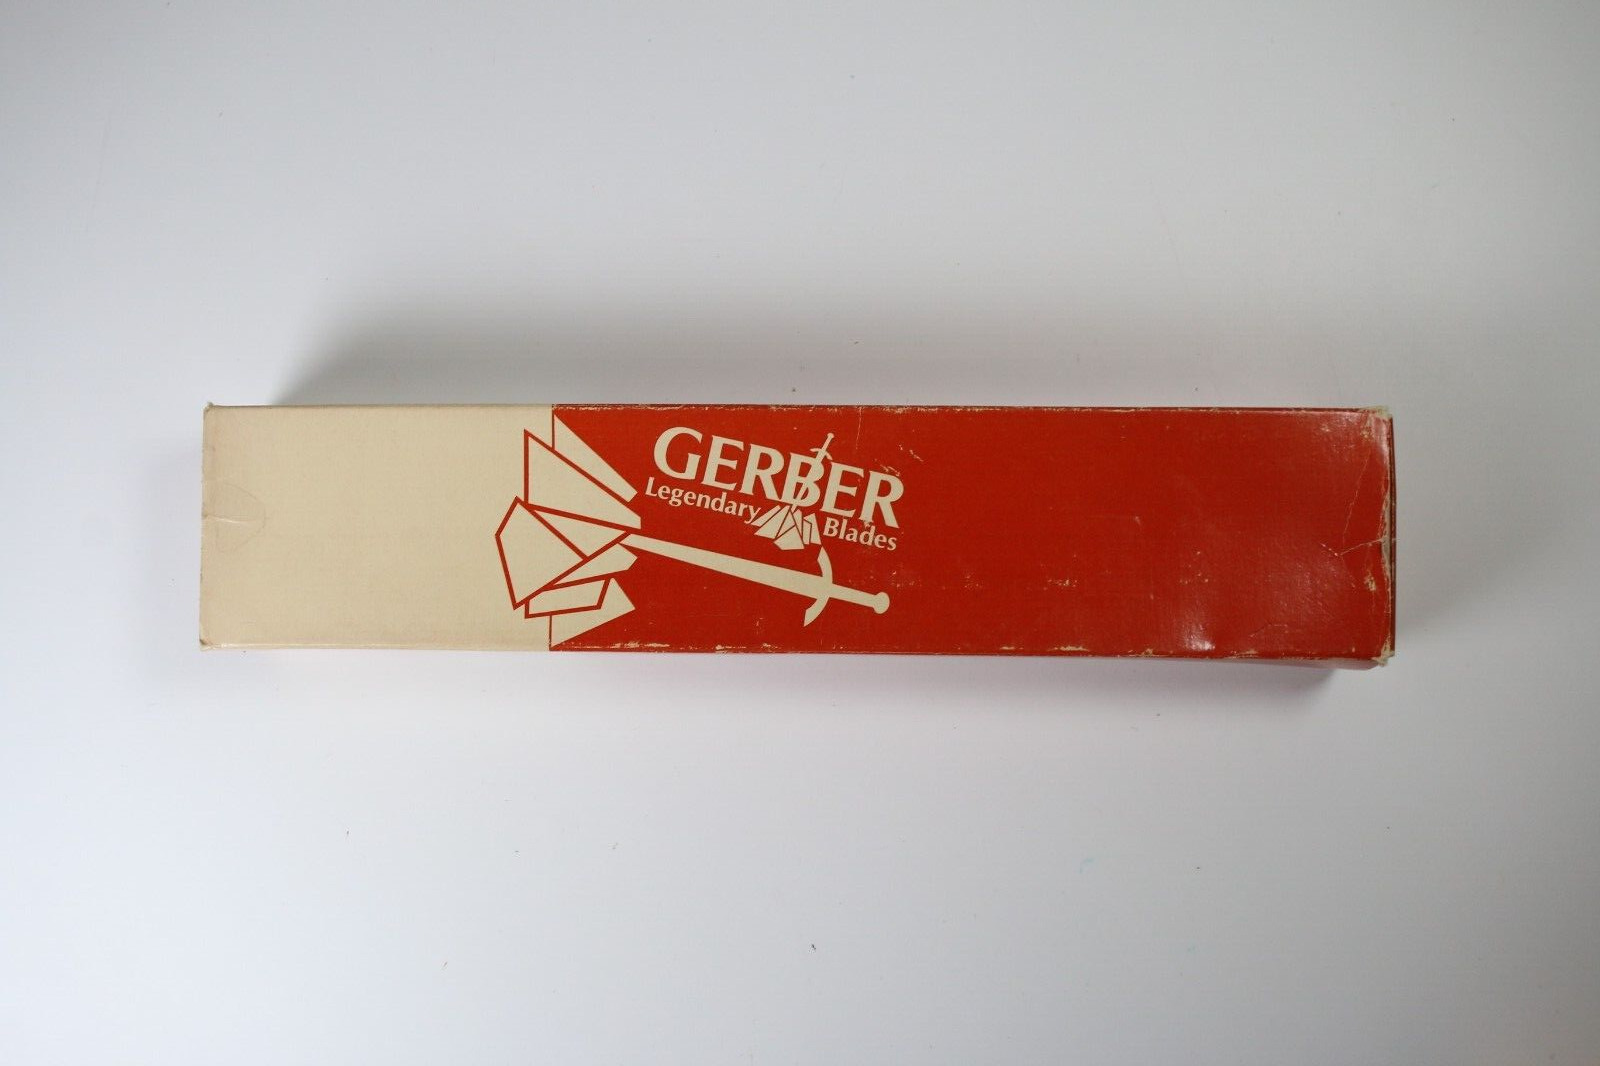 Gerber model 525 CG knife with sheath New Old Stock